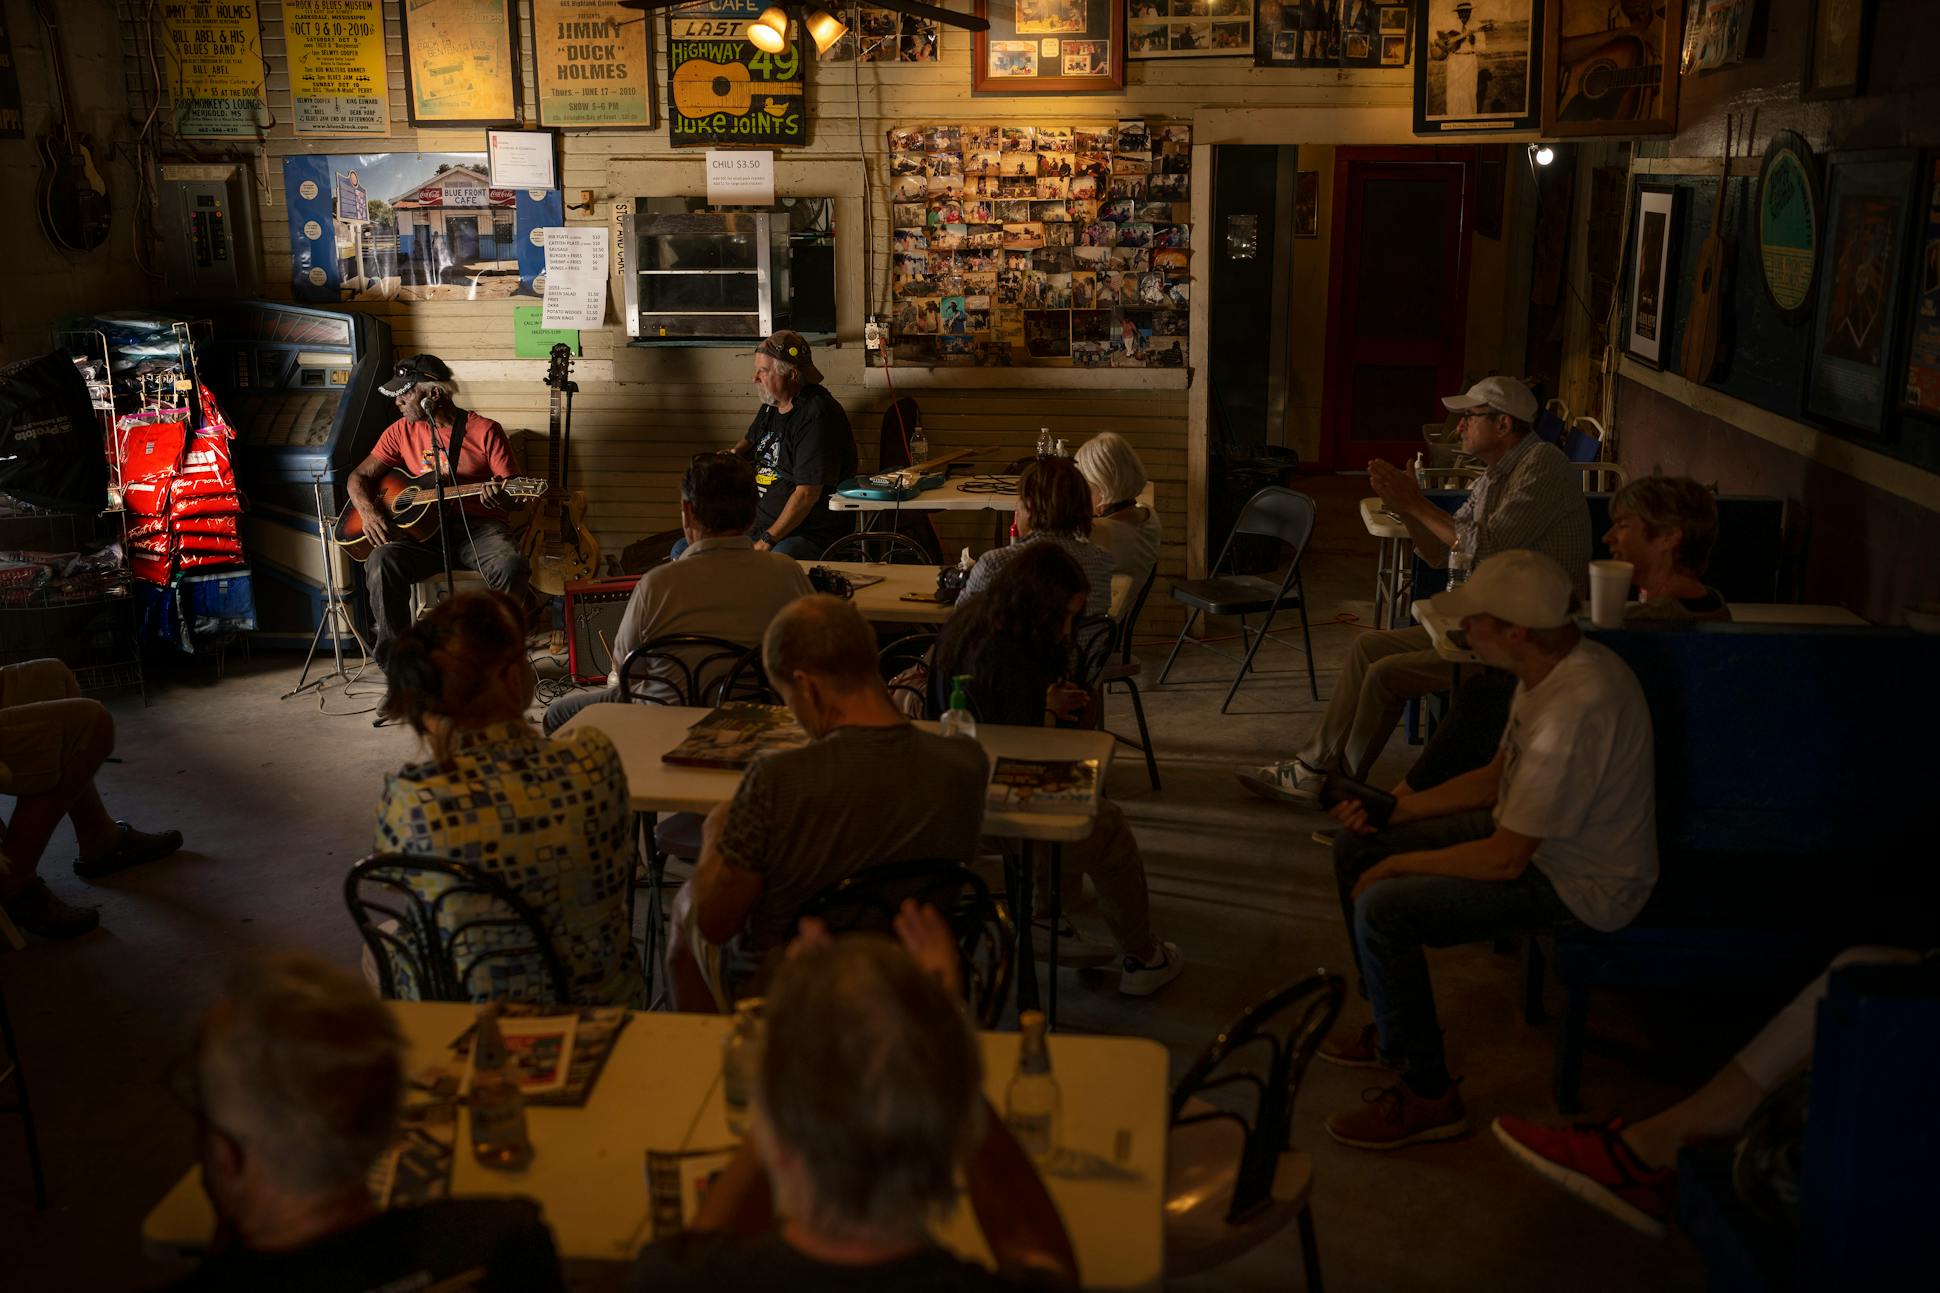 Grammy-nominated Jimmy “Duck” Holmes entertained a group of German tourists at the Blue Front Cafe, Mississippi's oldest surviving juke joint. His parents opened it in 1948 in Bentonia, Miss.